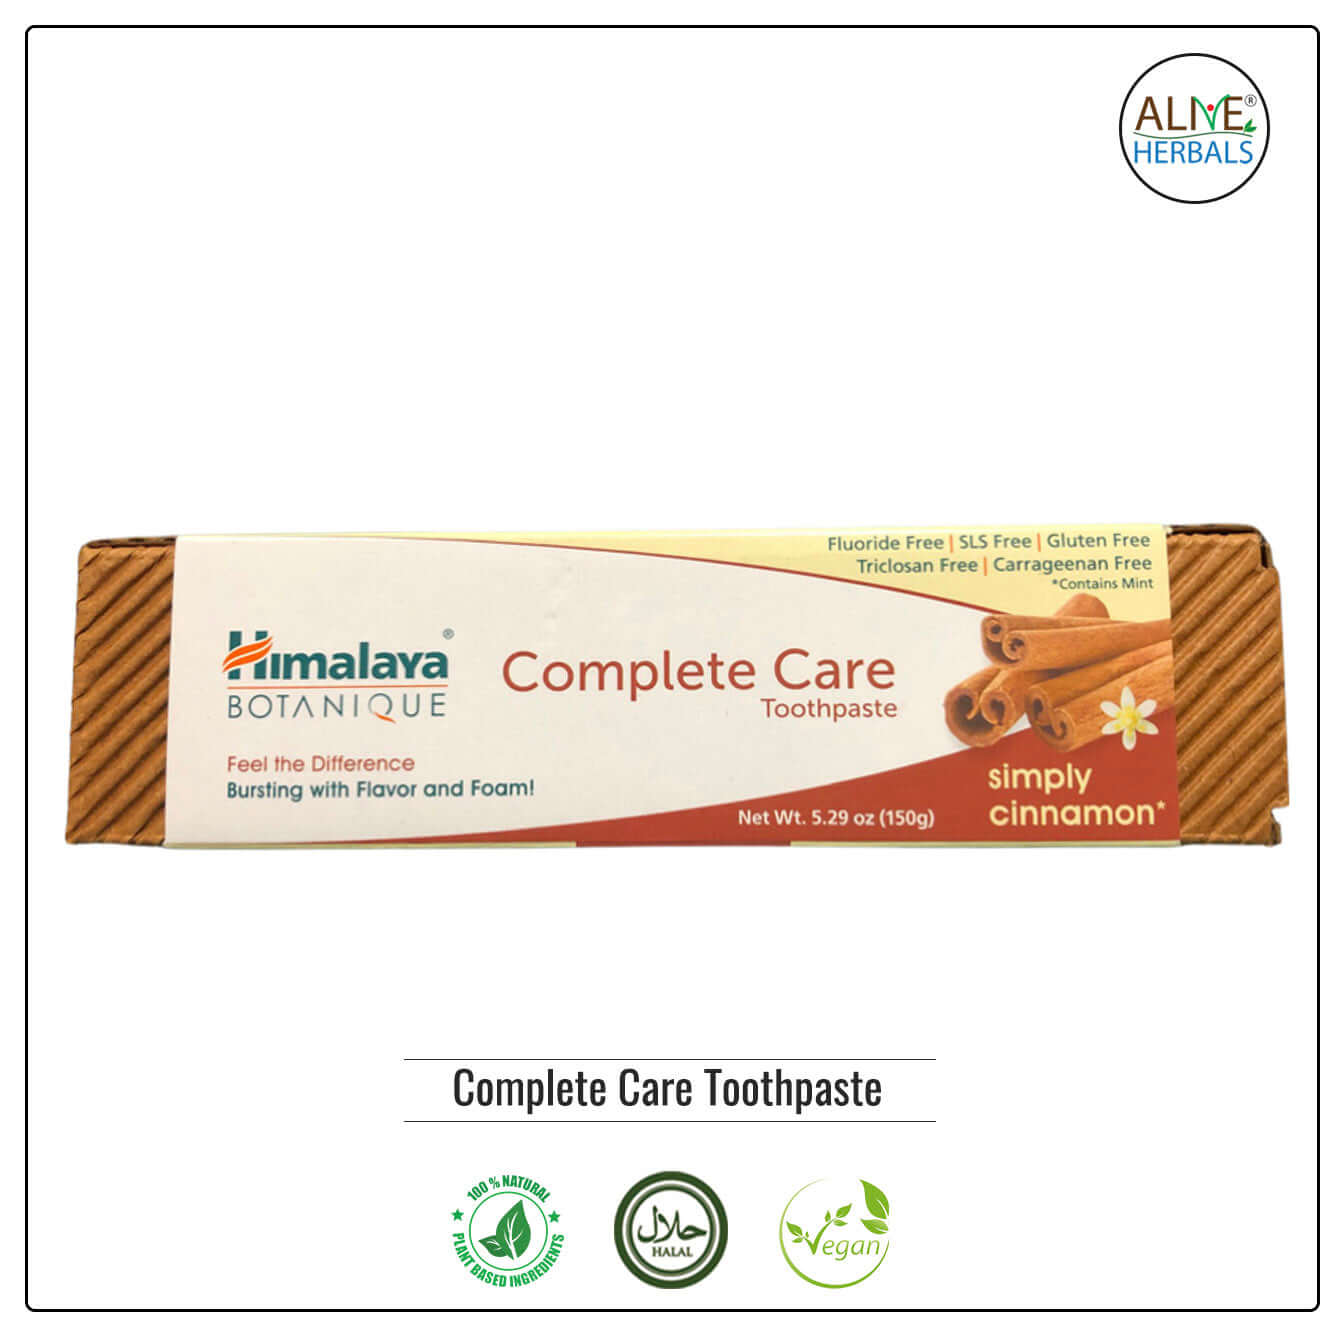 Complete Care Toothpaste - Buy at Natural Food Store | Alive Herbals.